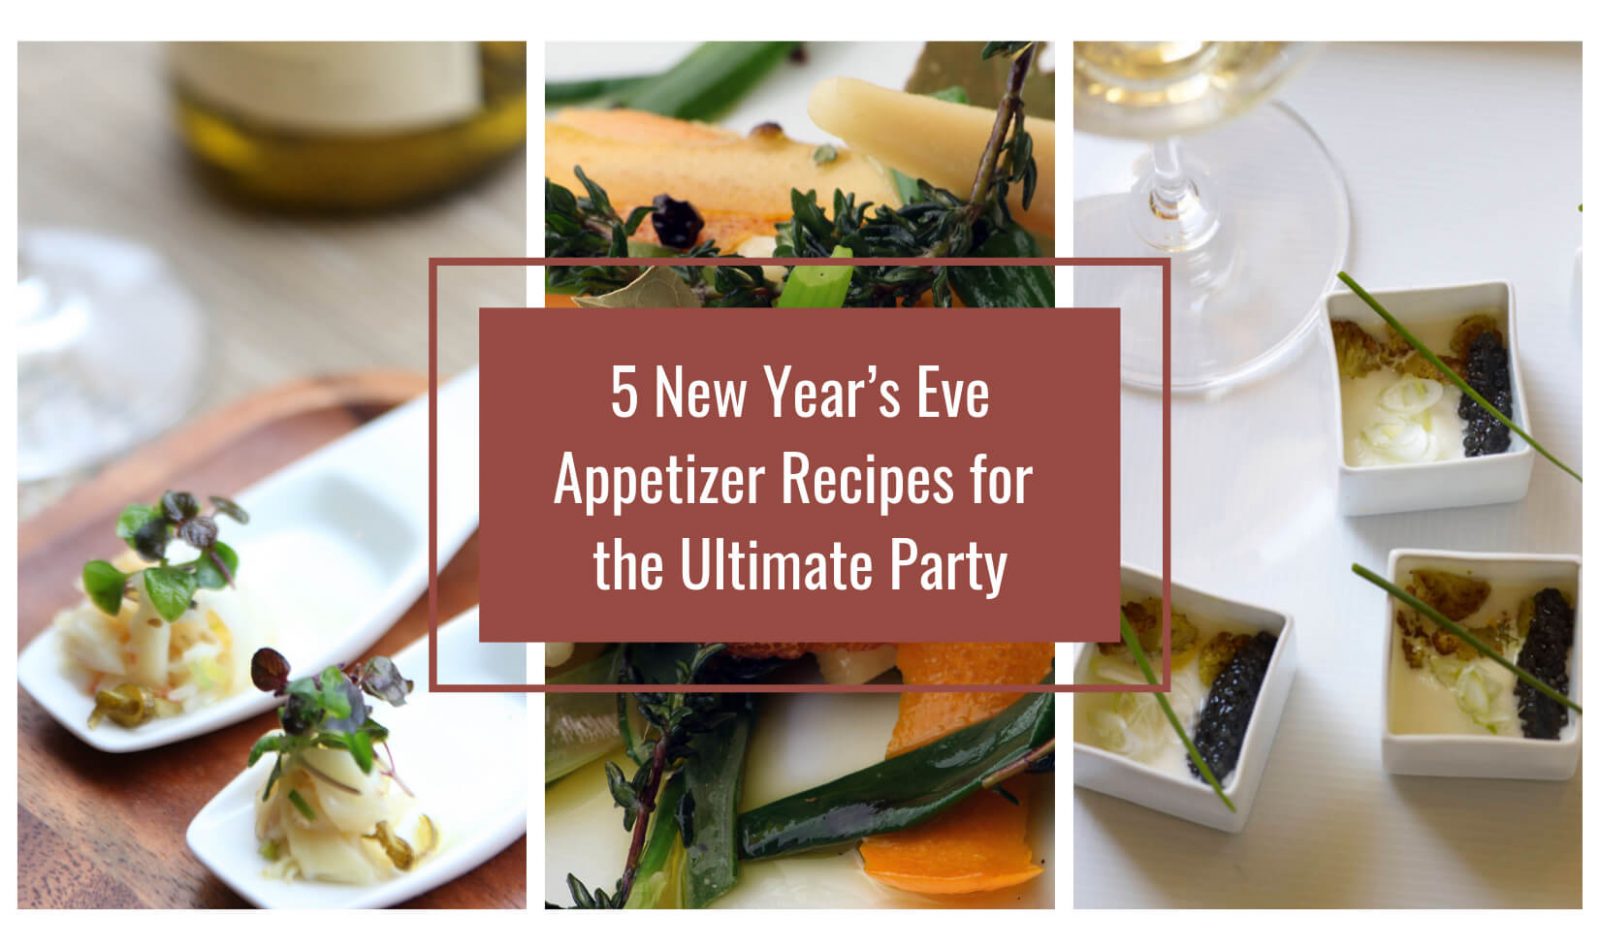 photo collage of three Jordan Winery New Year’s Eve Cocktail Party appetizers with image text "5 New Year's eve appetizer recipes for the ultimate party"